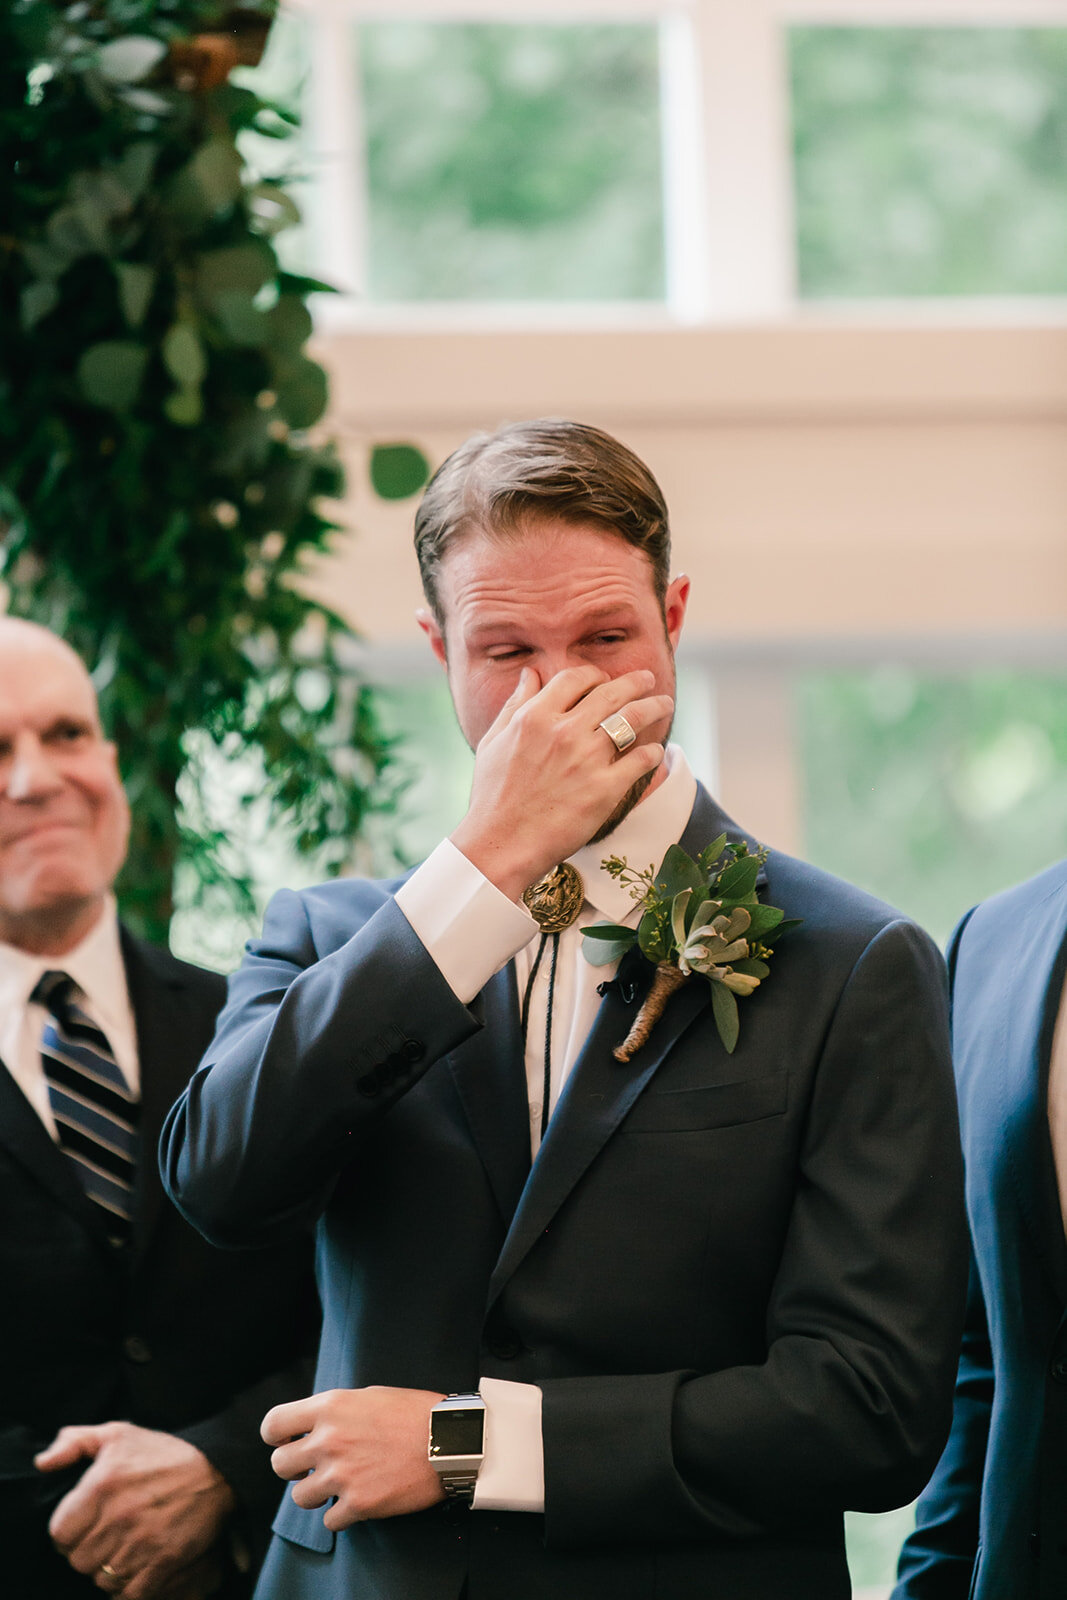  groom tearing up as the bride walks down the aisle 